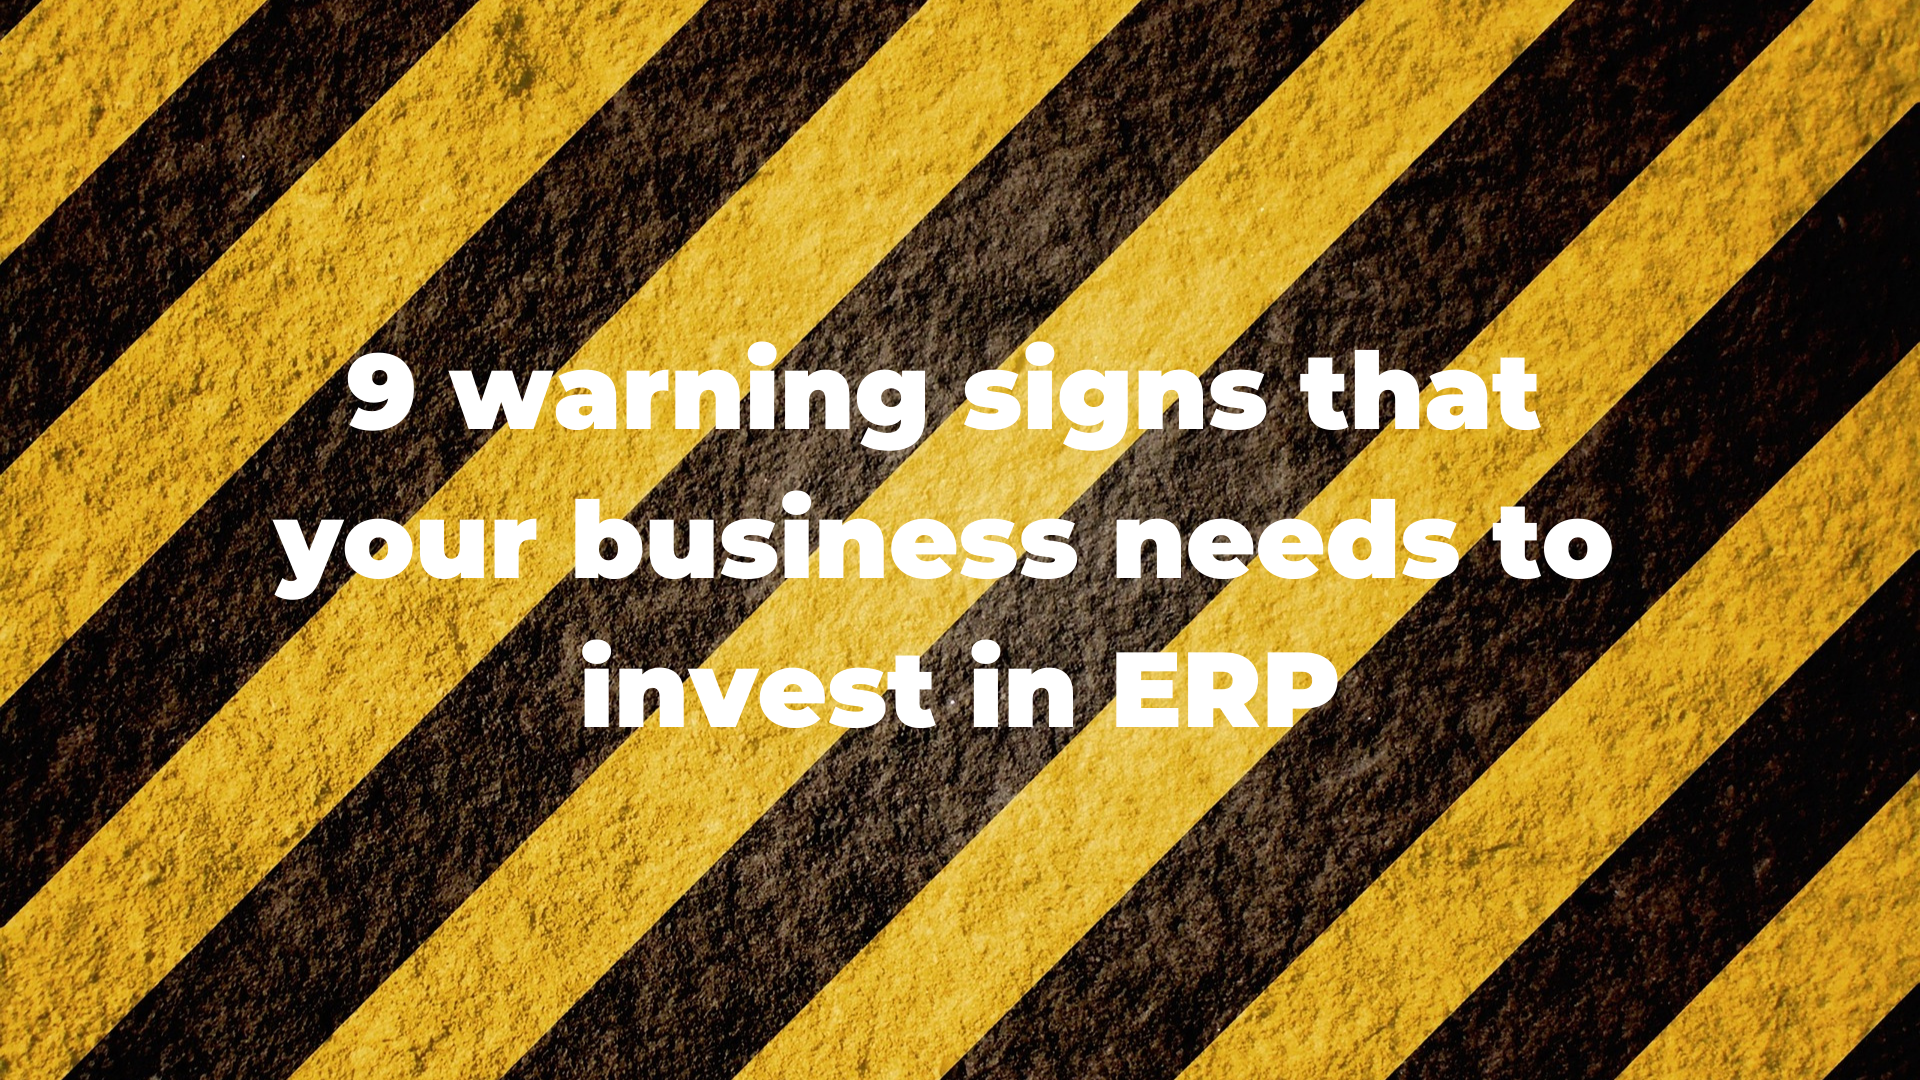 Warning signs about ERP